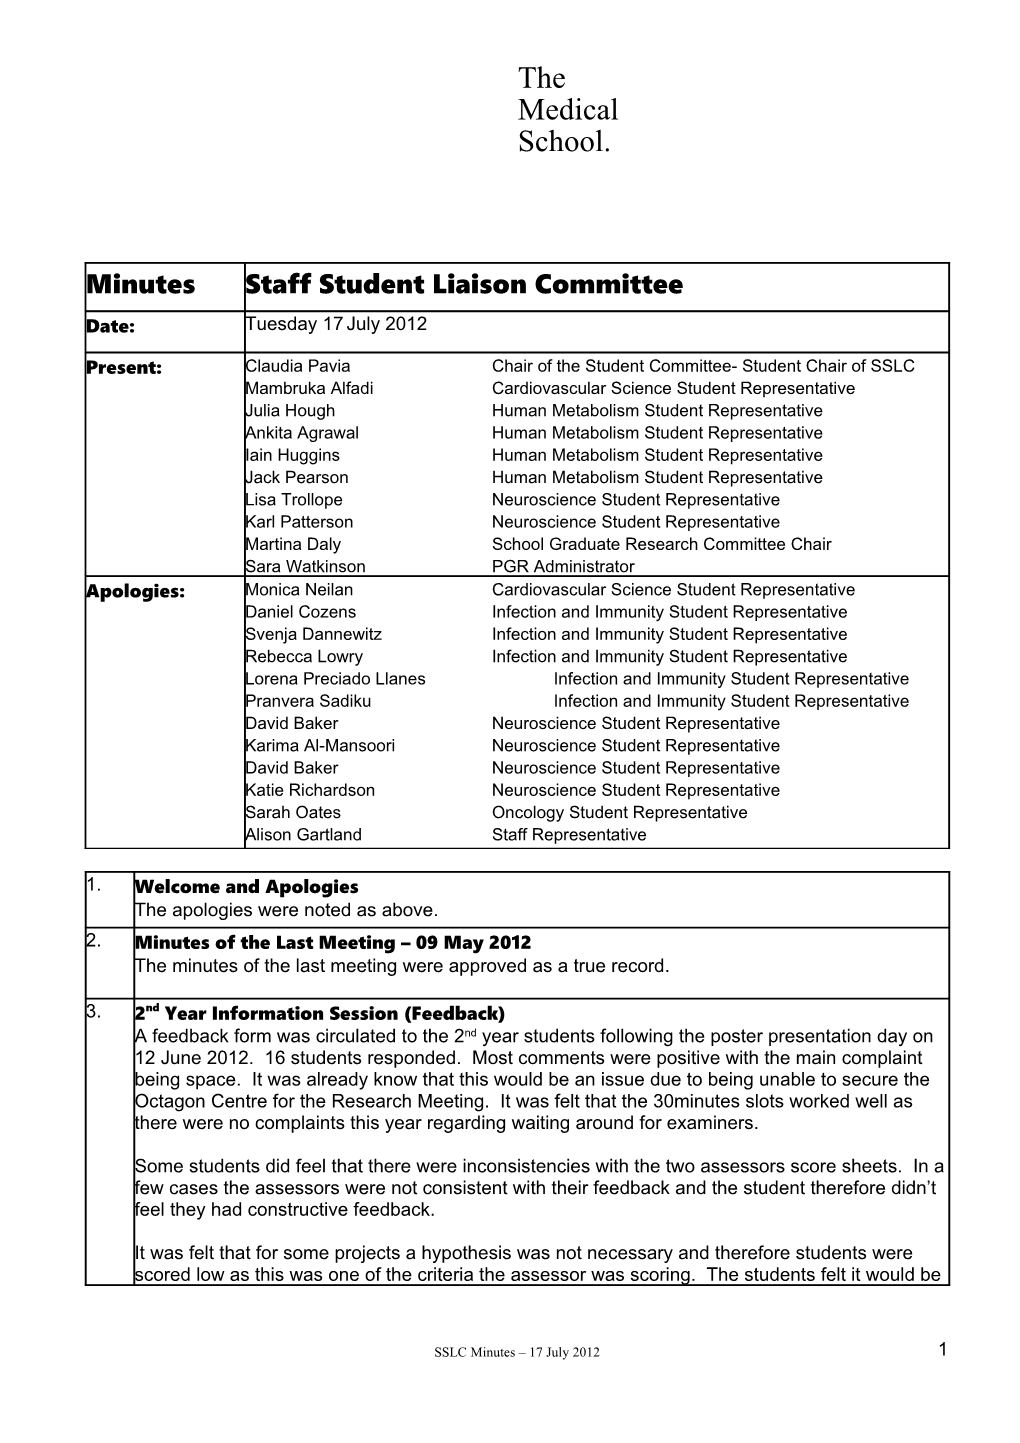 Staff Student Liaison Committee